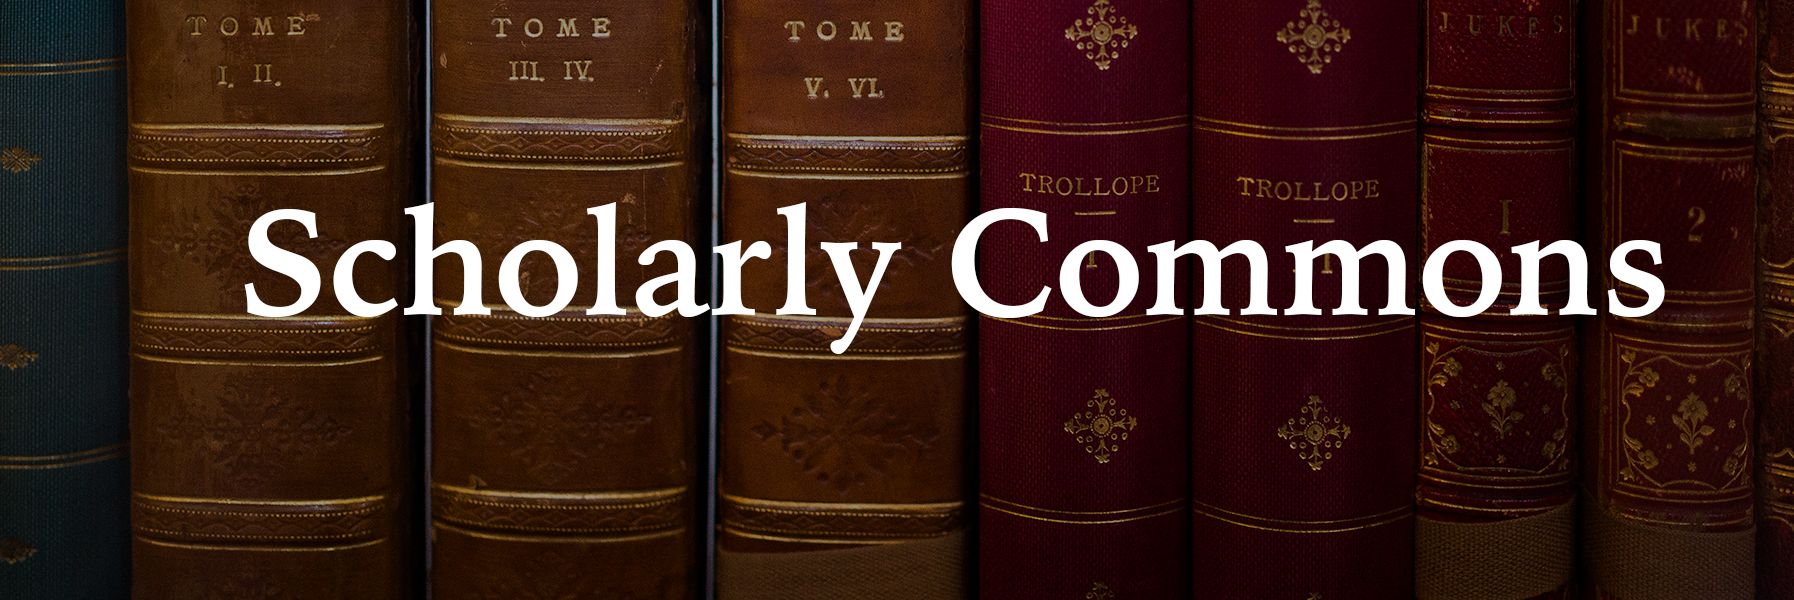 Scholarly Commons